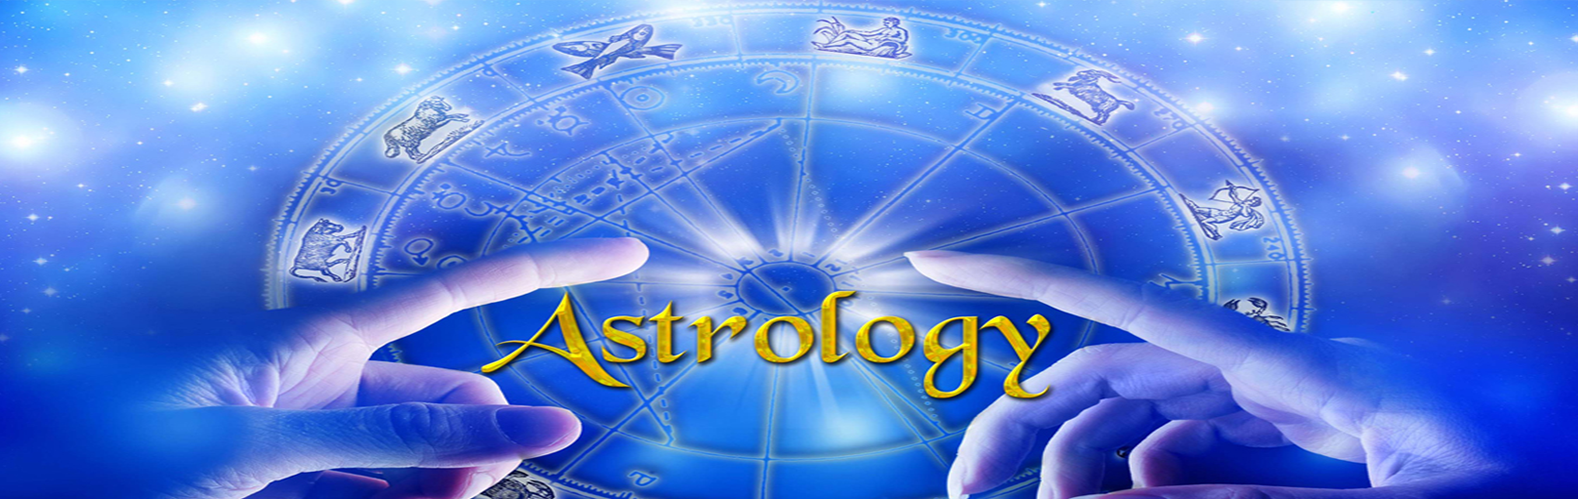 Best Top Famous Indian Astrologer & Astrology Services in Canada India ...